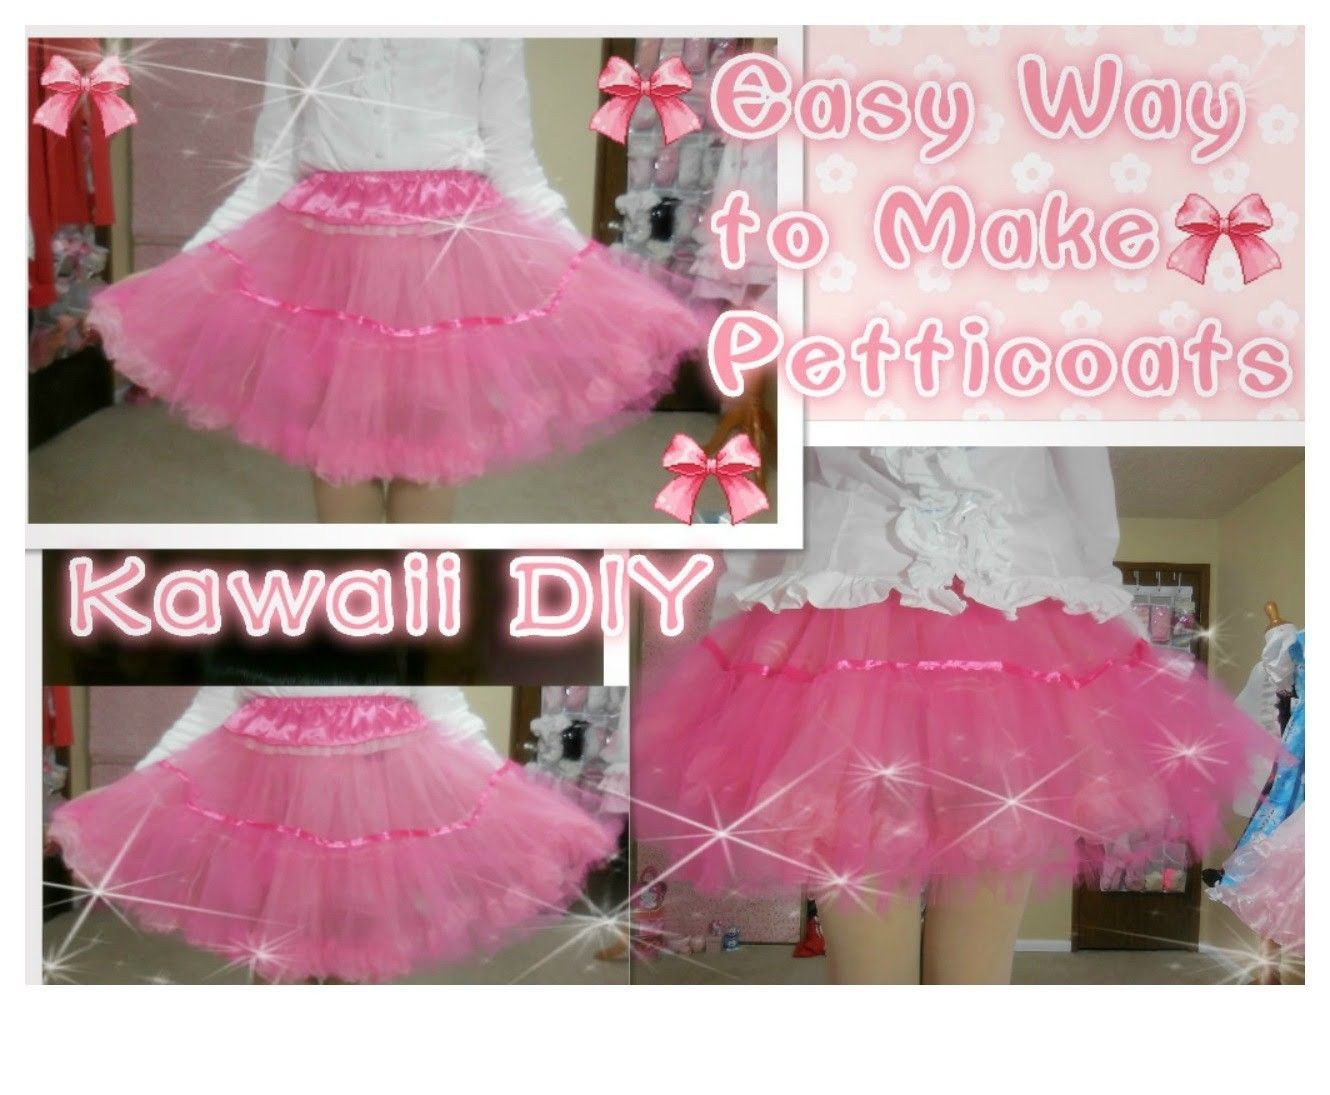 Kawaii DIY- How to Make Petticoats for Beginners (with only 3 yards tulle)(easy) - Kawaii DIY- How to Make Petticoats for Beginners (with only 3 yards tulle)(easy) -   18 kawaii diy Clothes ideas